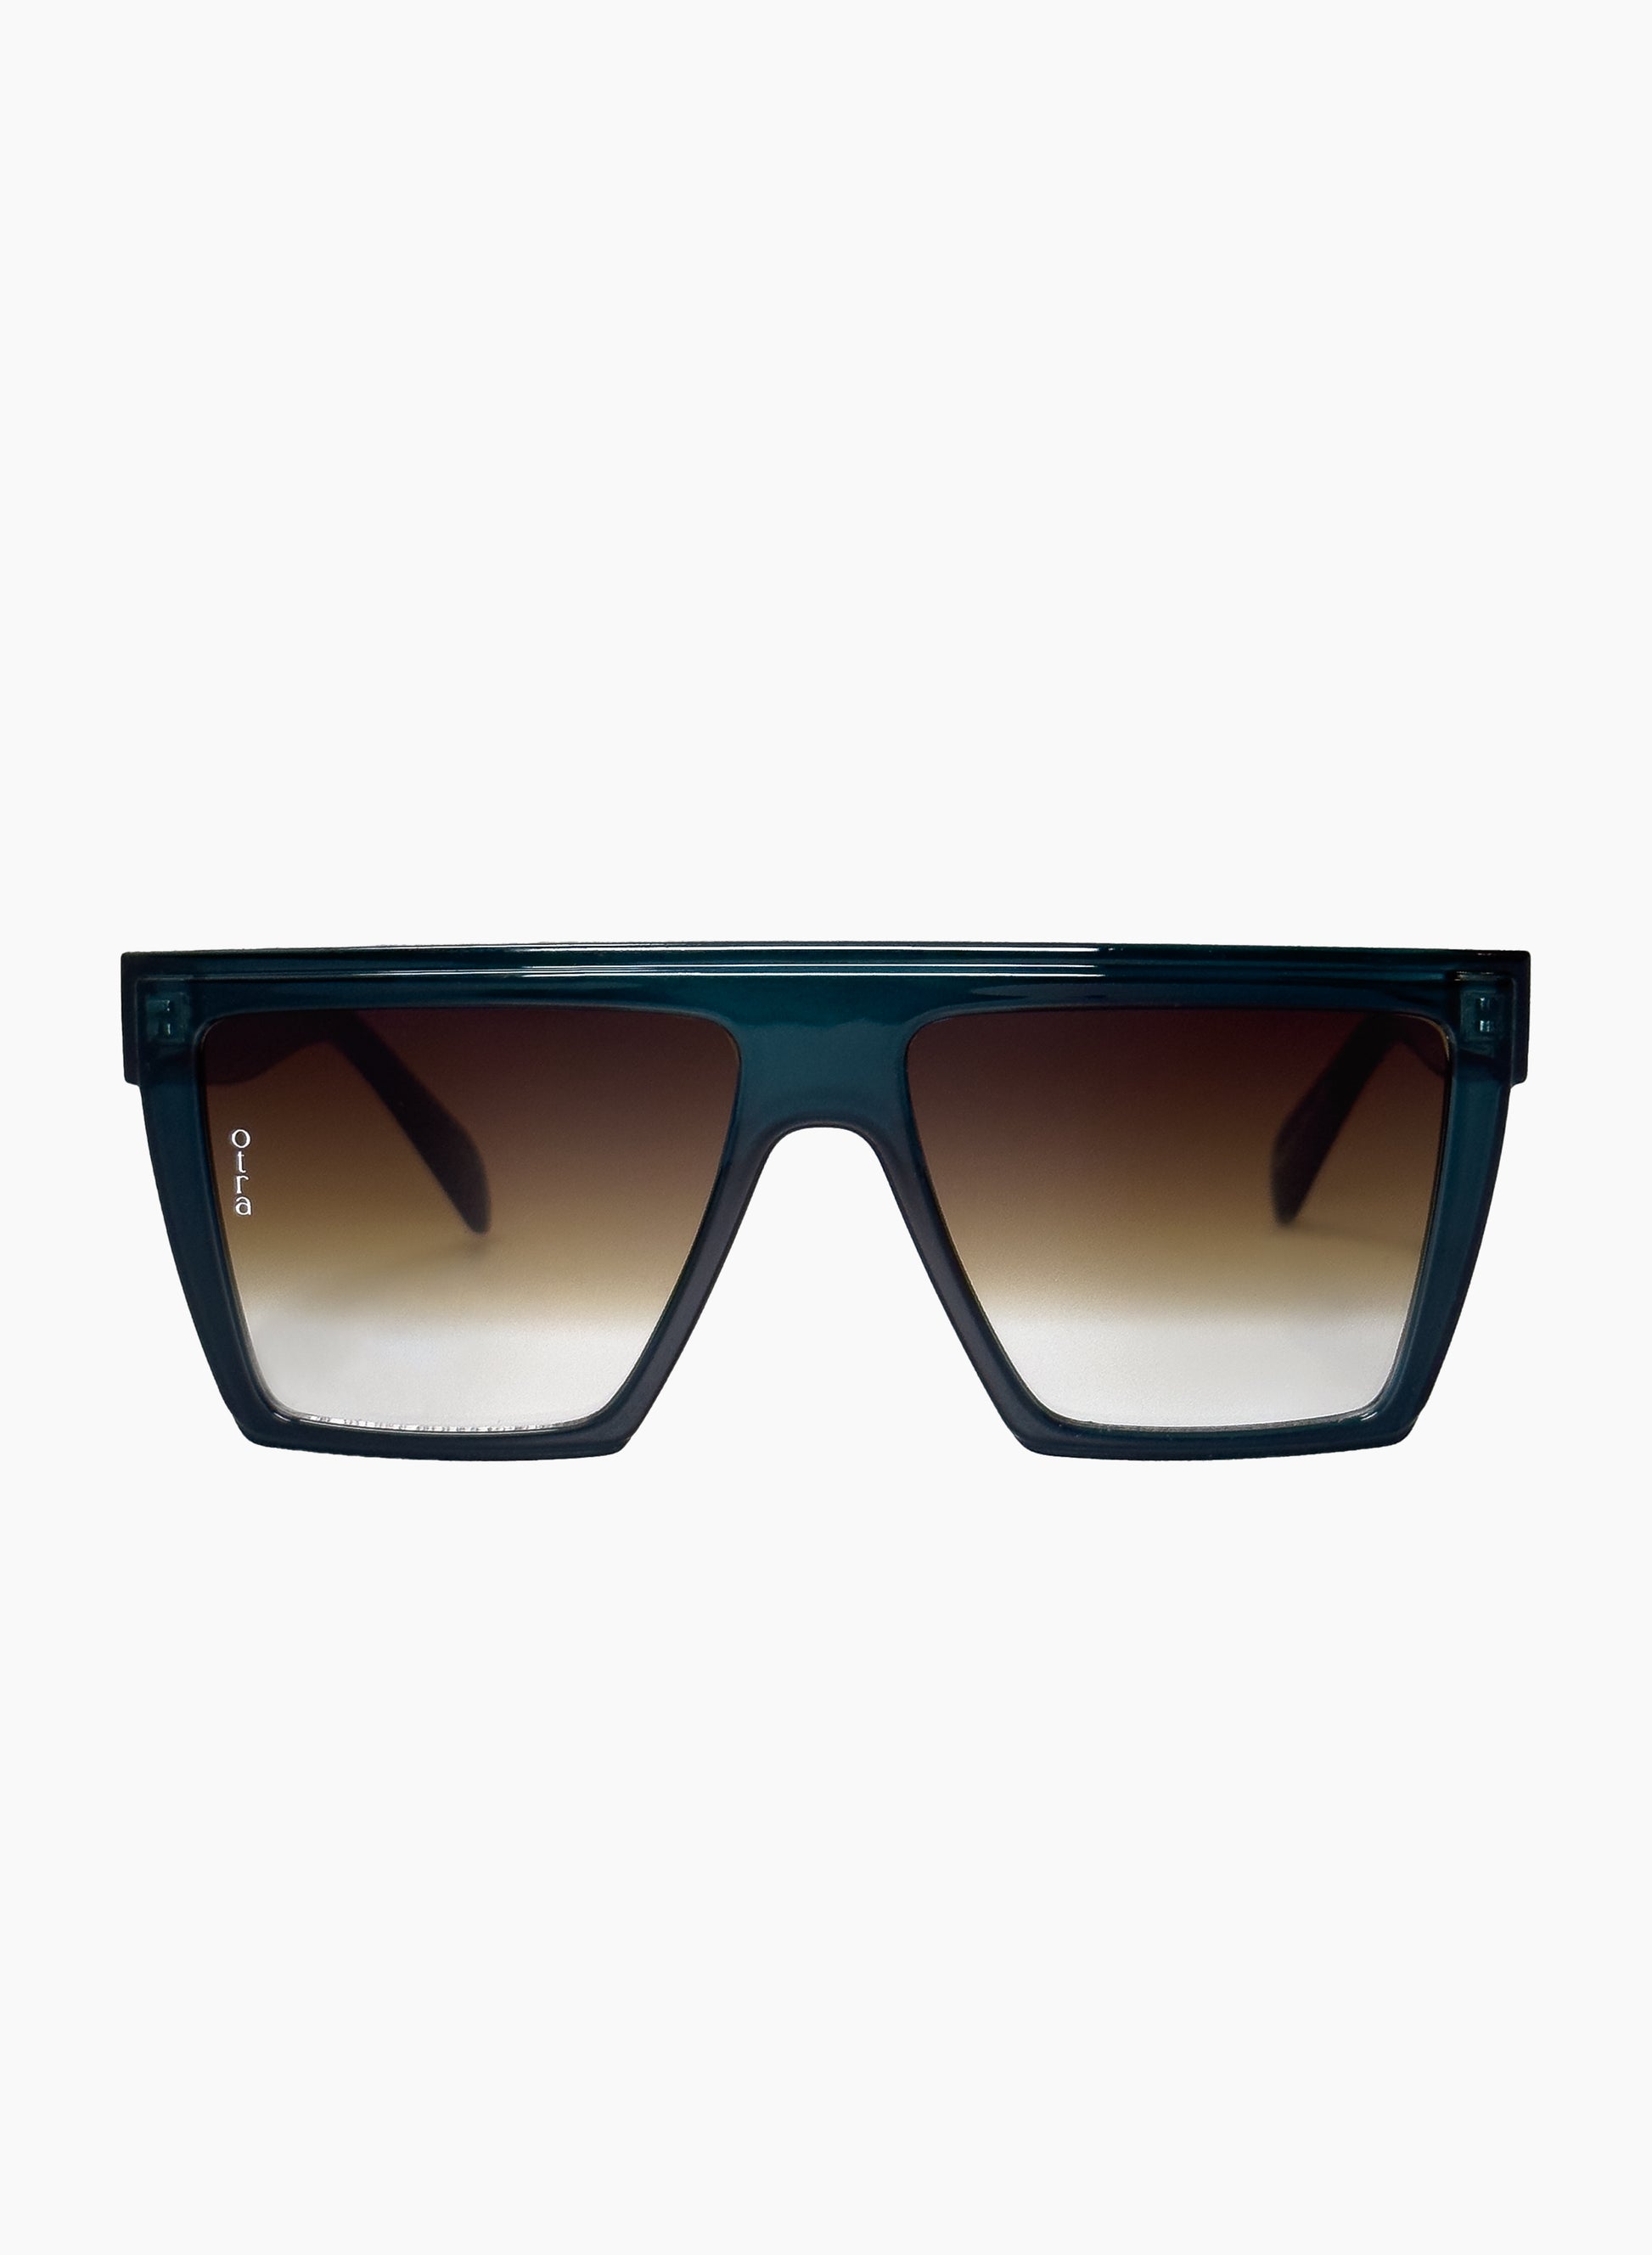 Ollie flat top shield oversized shield sunglasses in navy